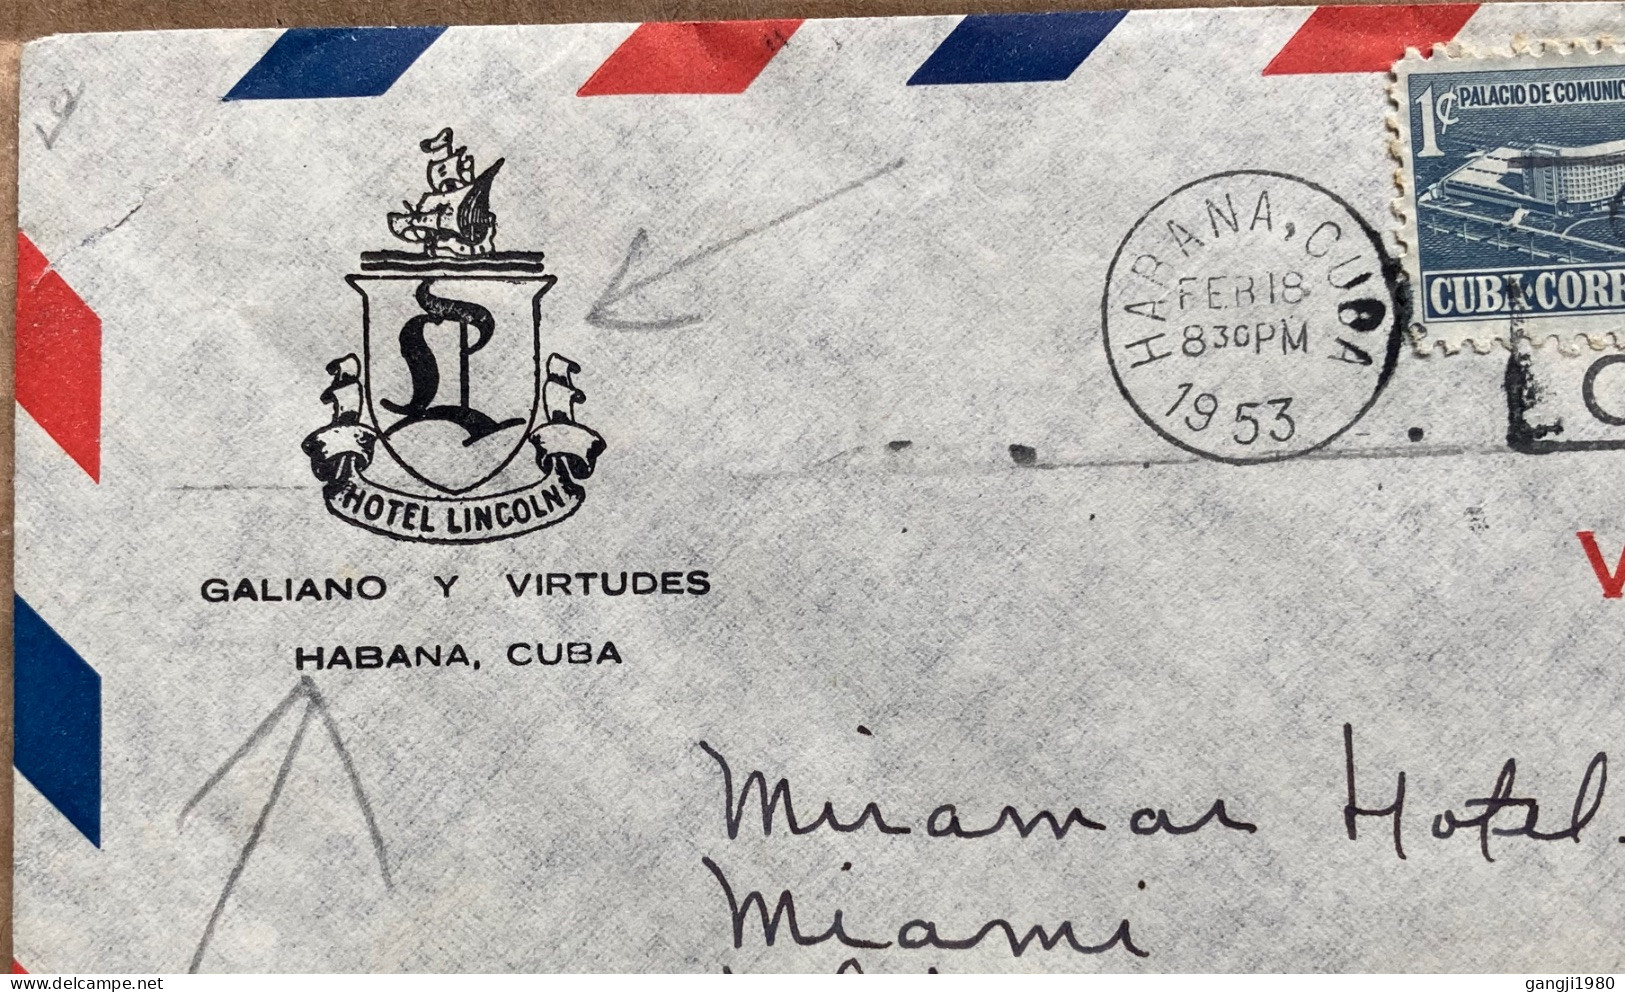 CUBA 1953, ILLUSTRATE COVER, HOTEL LINCOLN, USED TO USA, COOPERATE FOR CENSUS, MACHINE SLOGAN, BUILDING, AIR PLANE, HABA - Briefe U. Dokumente